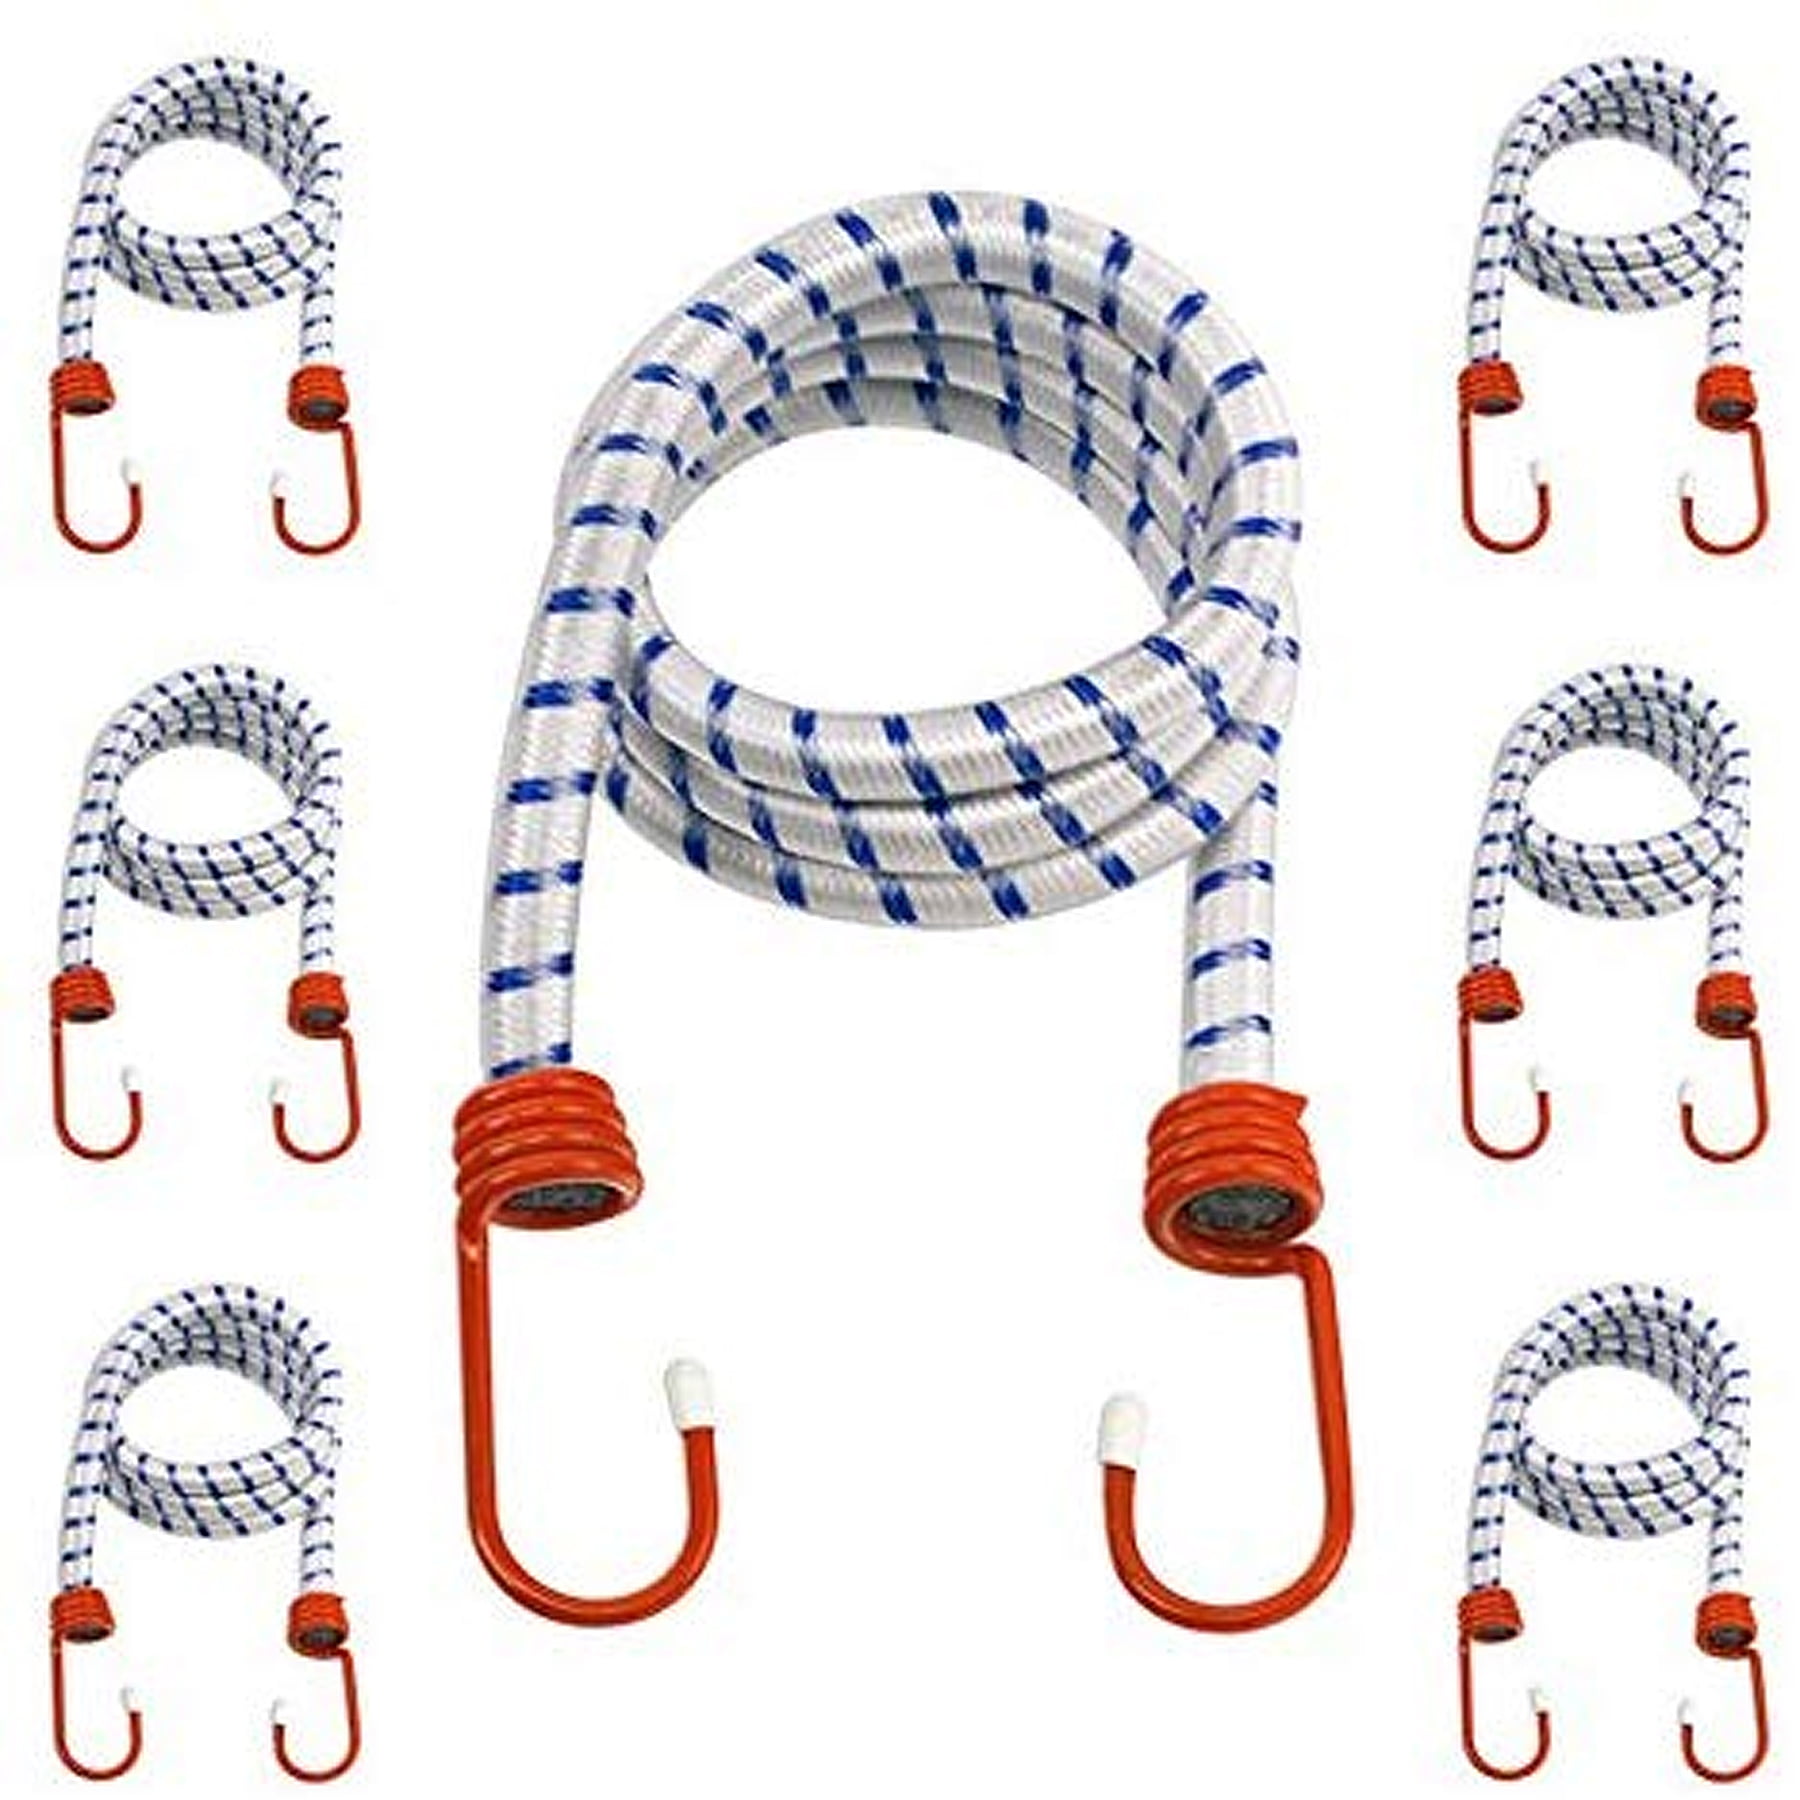 4 x 72" 9mm Bungee Cords Straps Hooks Elasticated Ropes Car Bike Red Tie Luggage 